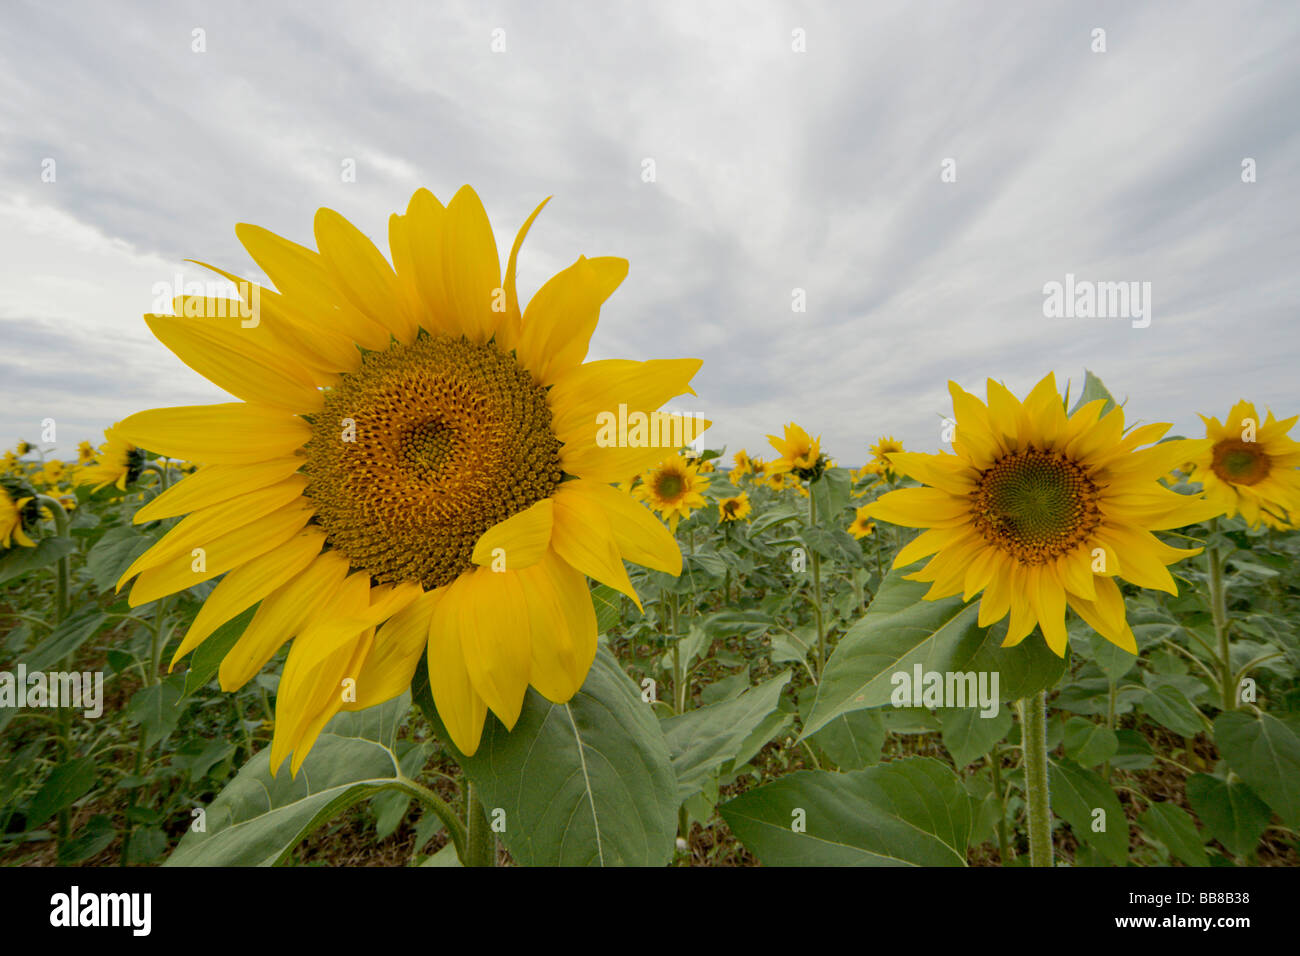 Sunflowers taken with a wide angle lens against the sky, Suedburgenland, Austria, Europe Stock Photo